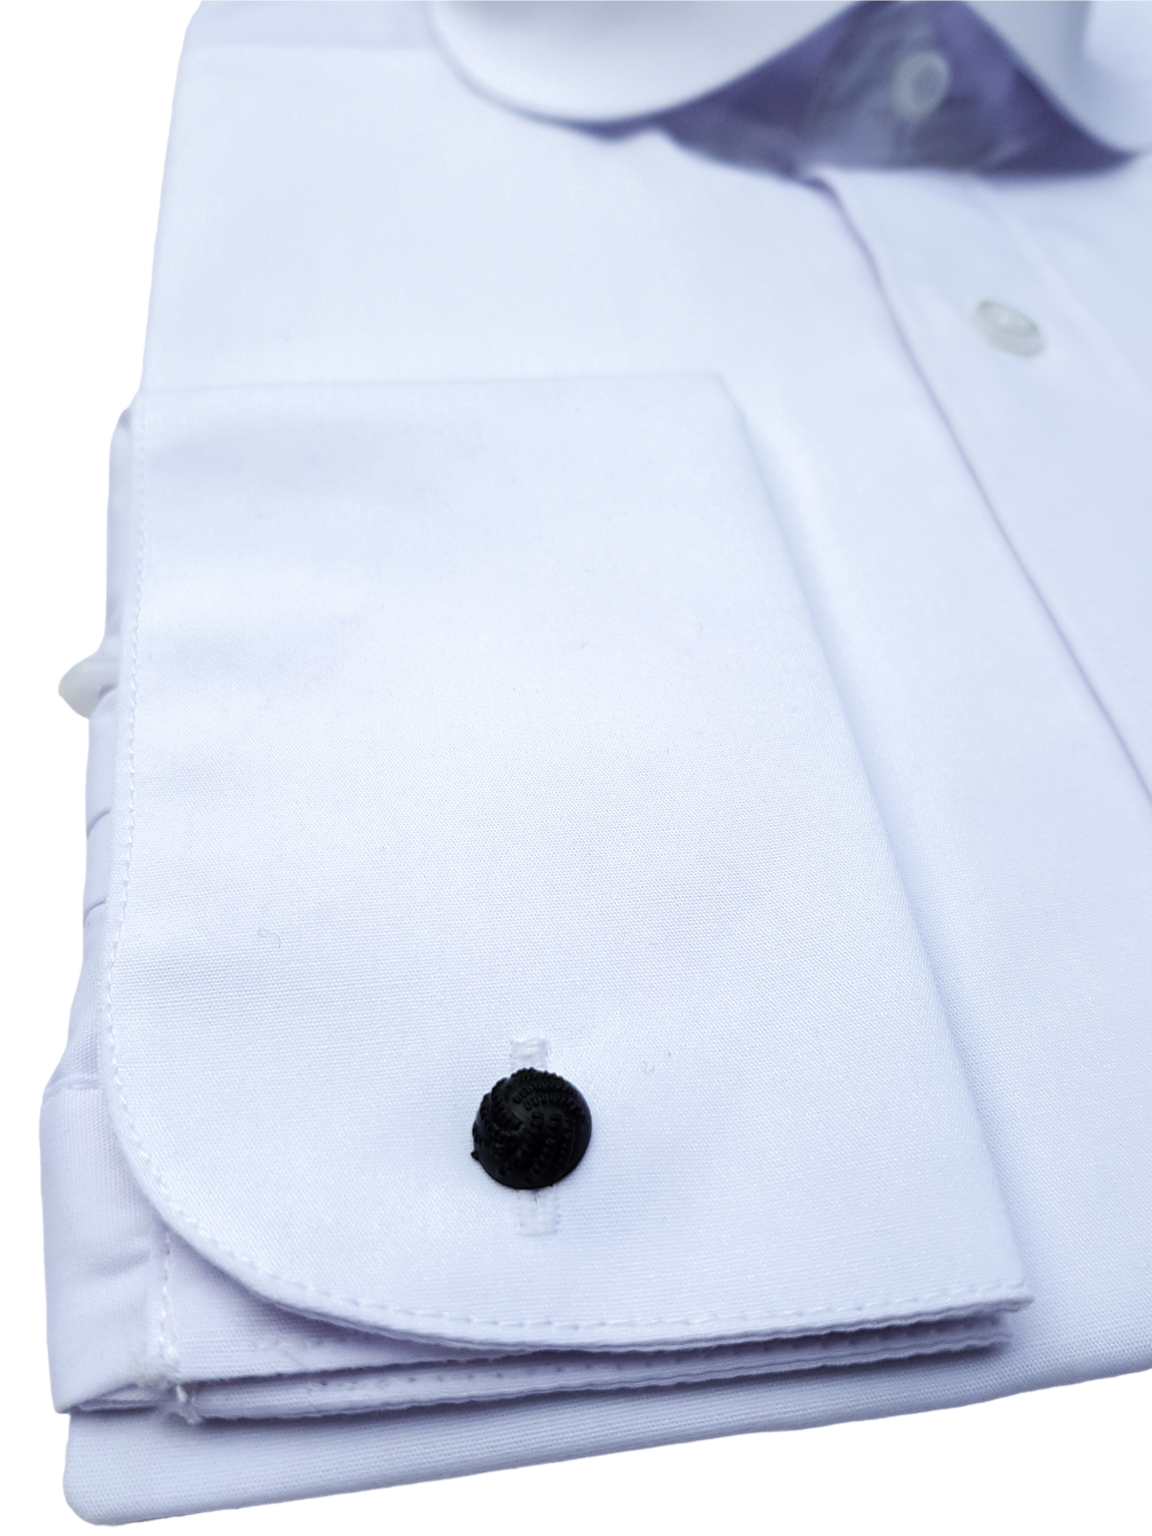 CR | Colin Ross Men’s White Penny Round Collar Double Cuff Shirt ...